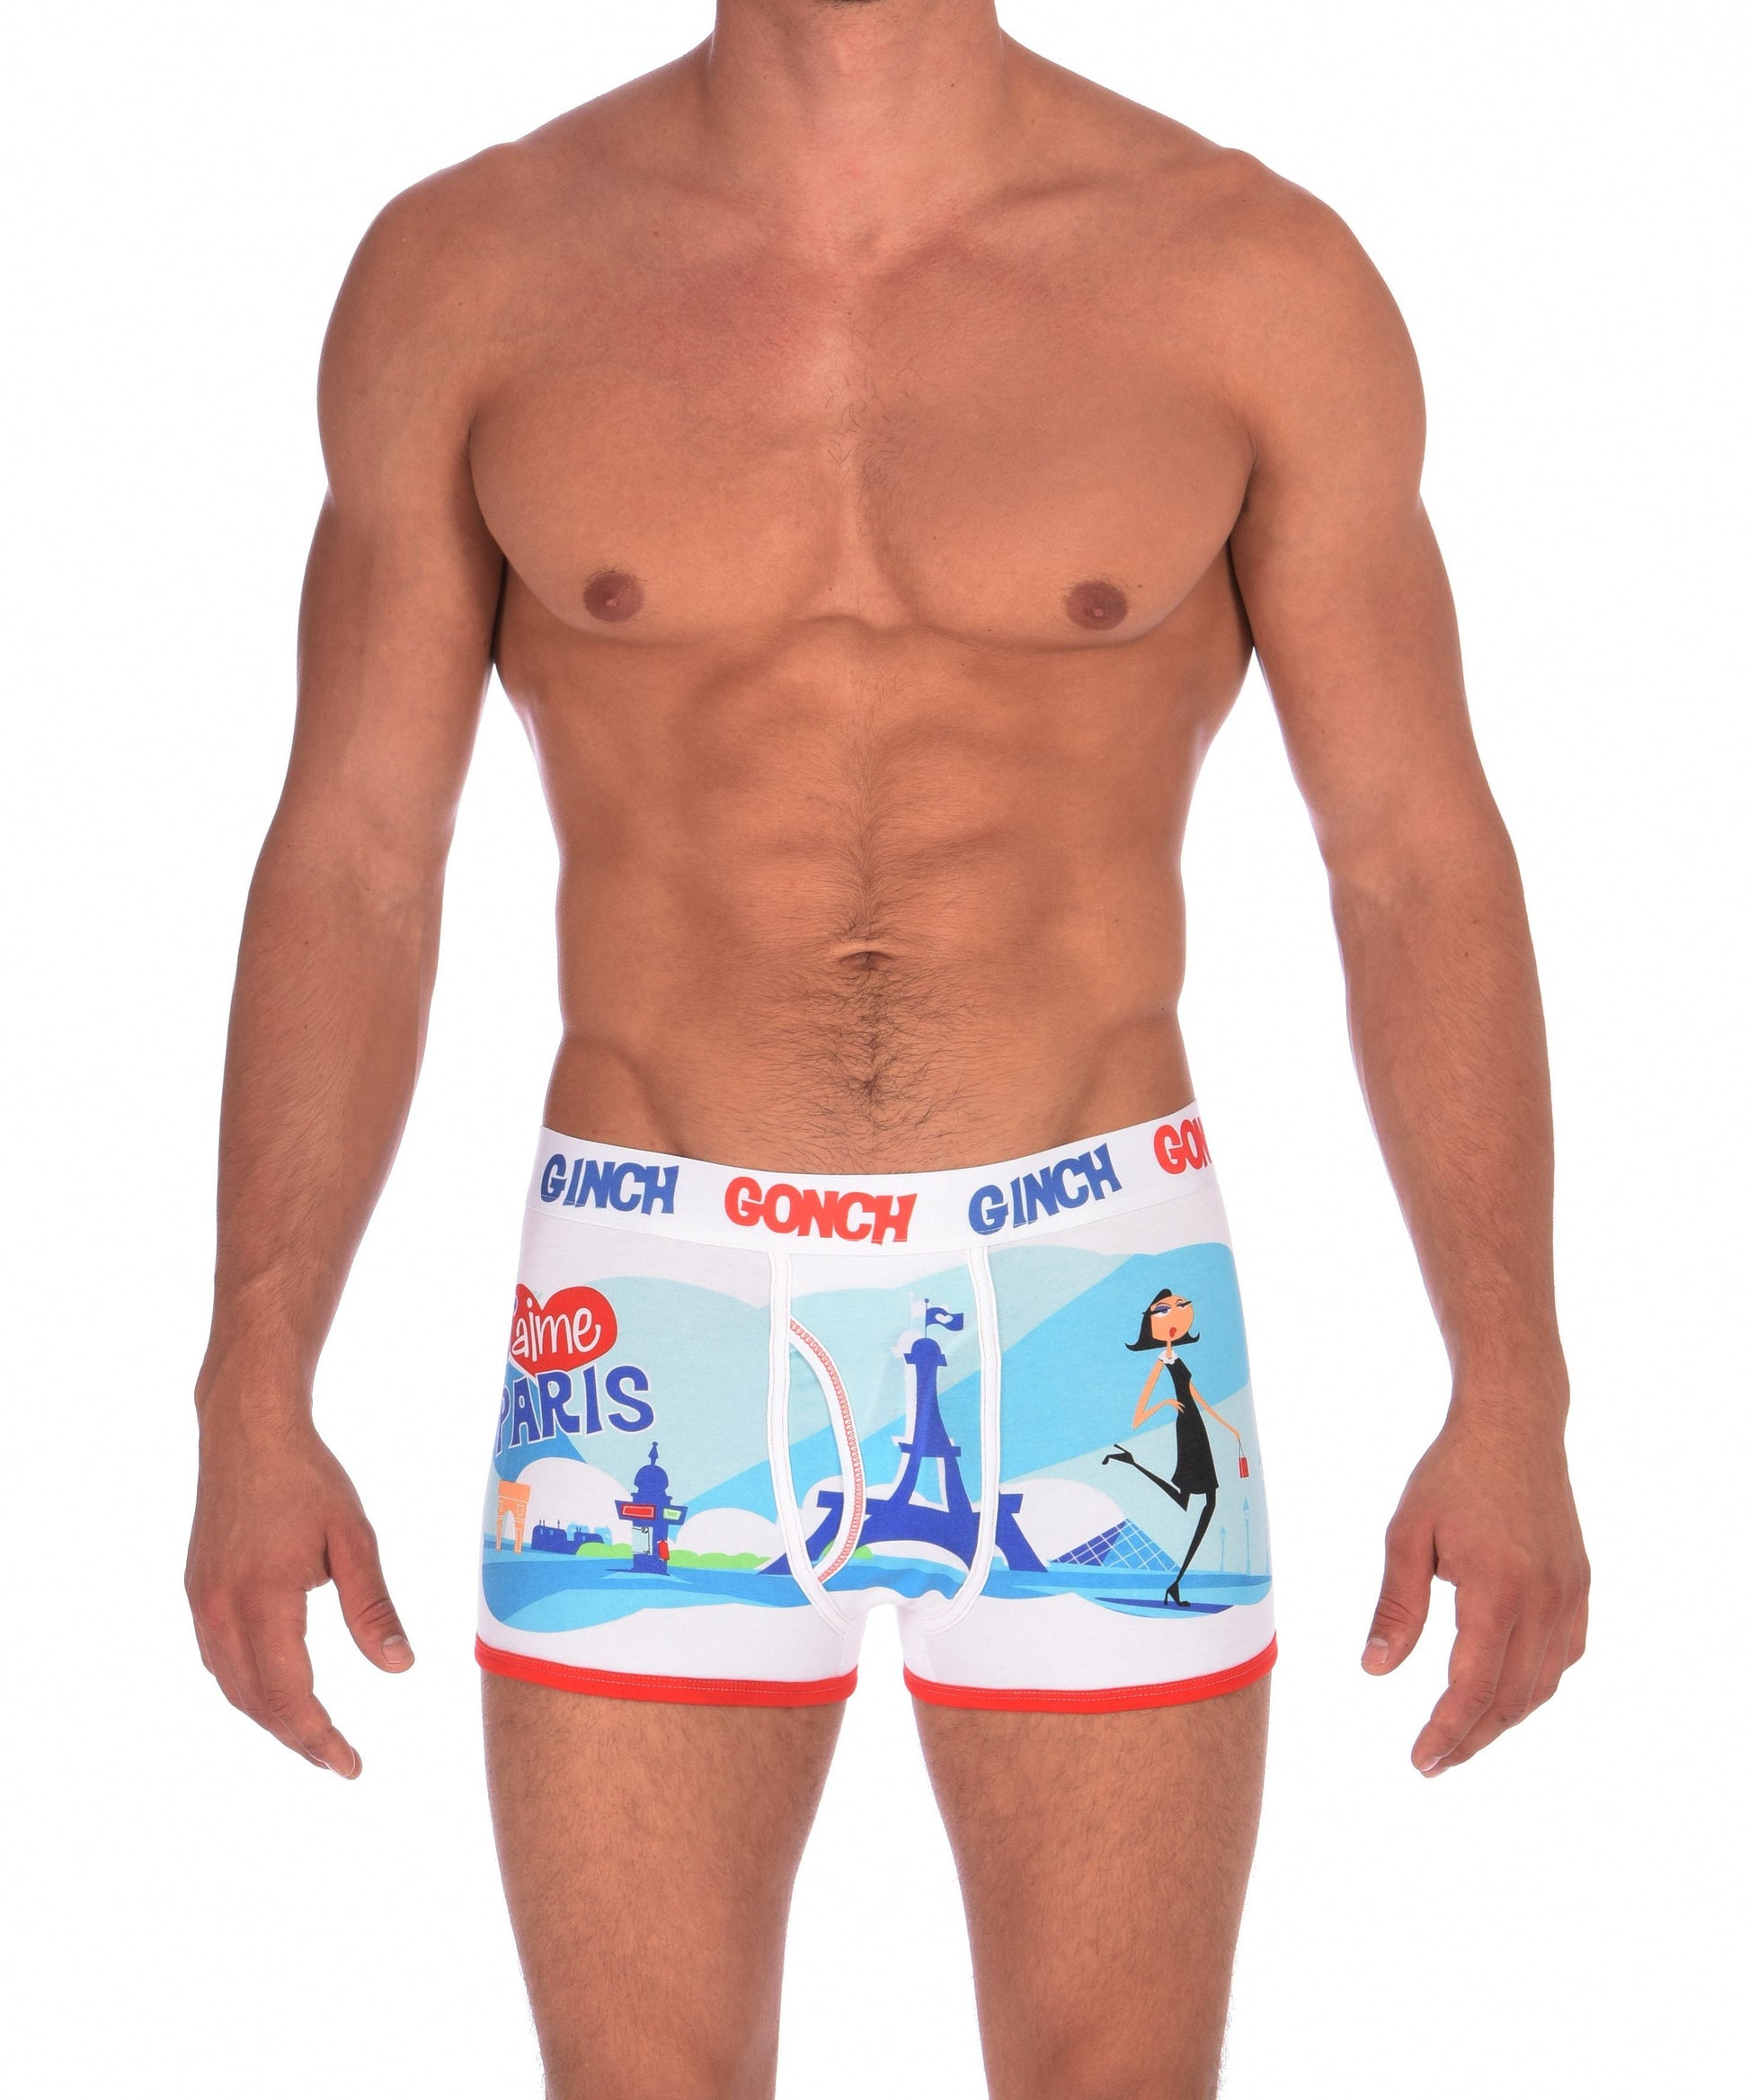 GG Ginch Gonch I Love Paris Boxer Brief trunk - Men's Underwear white fabric with scene of eiffel tower and french person red and white trim and white printed waistband front